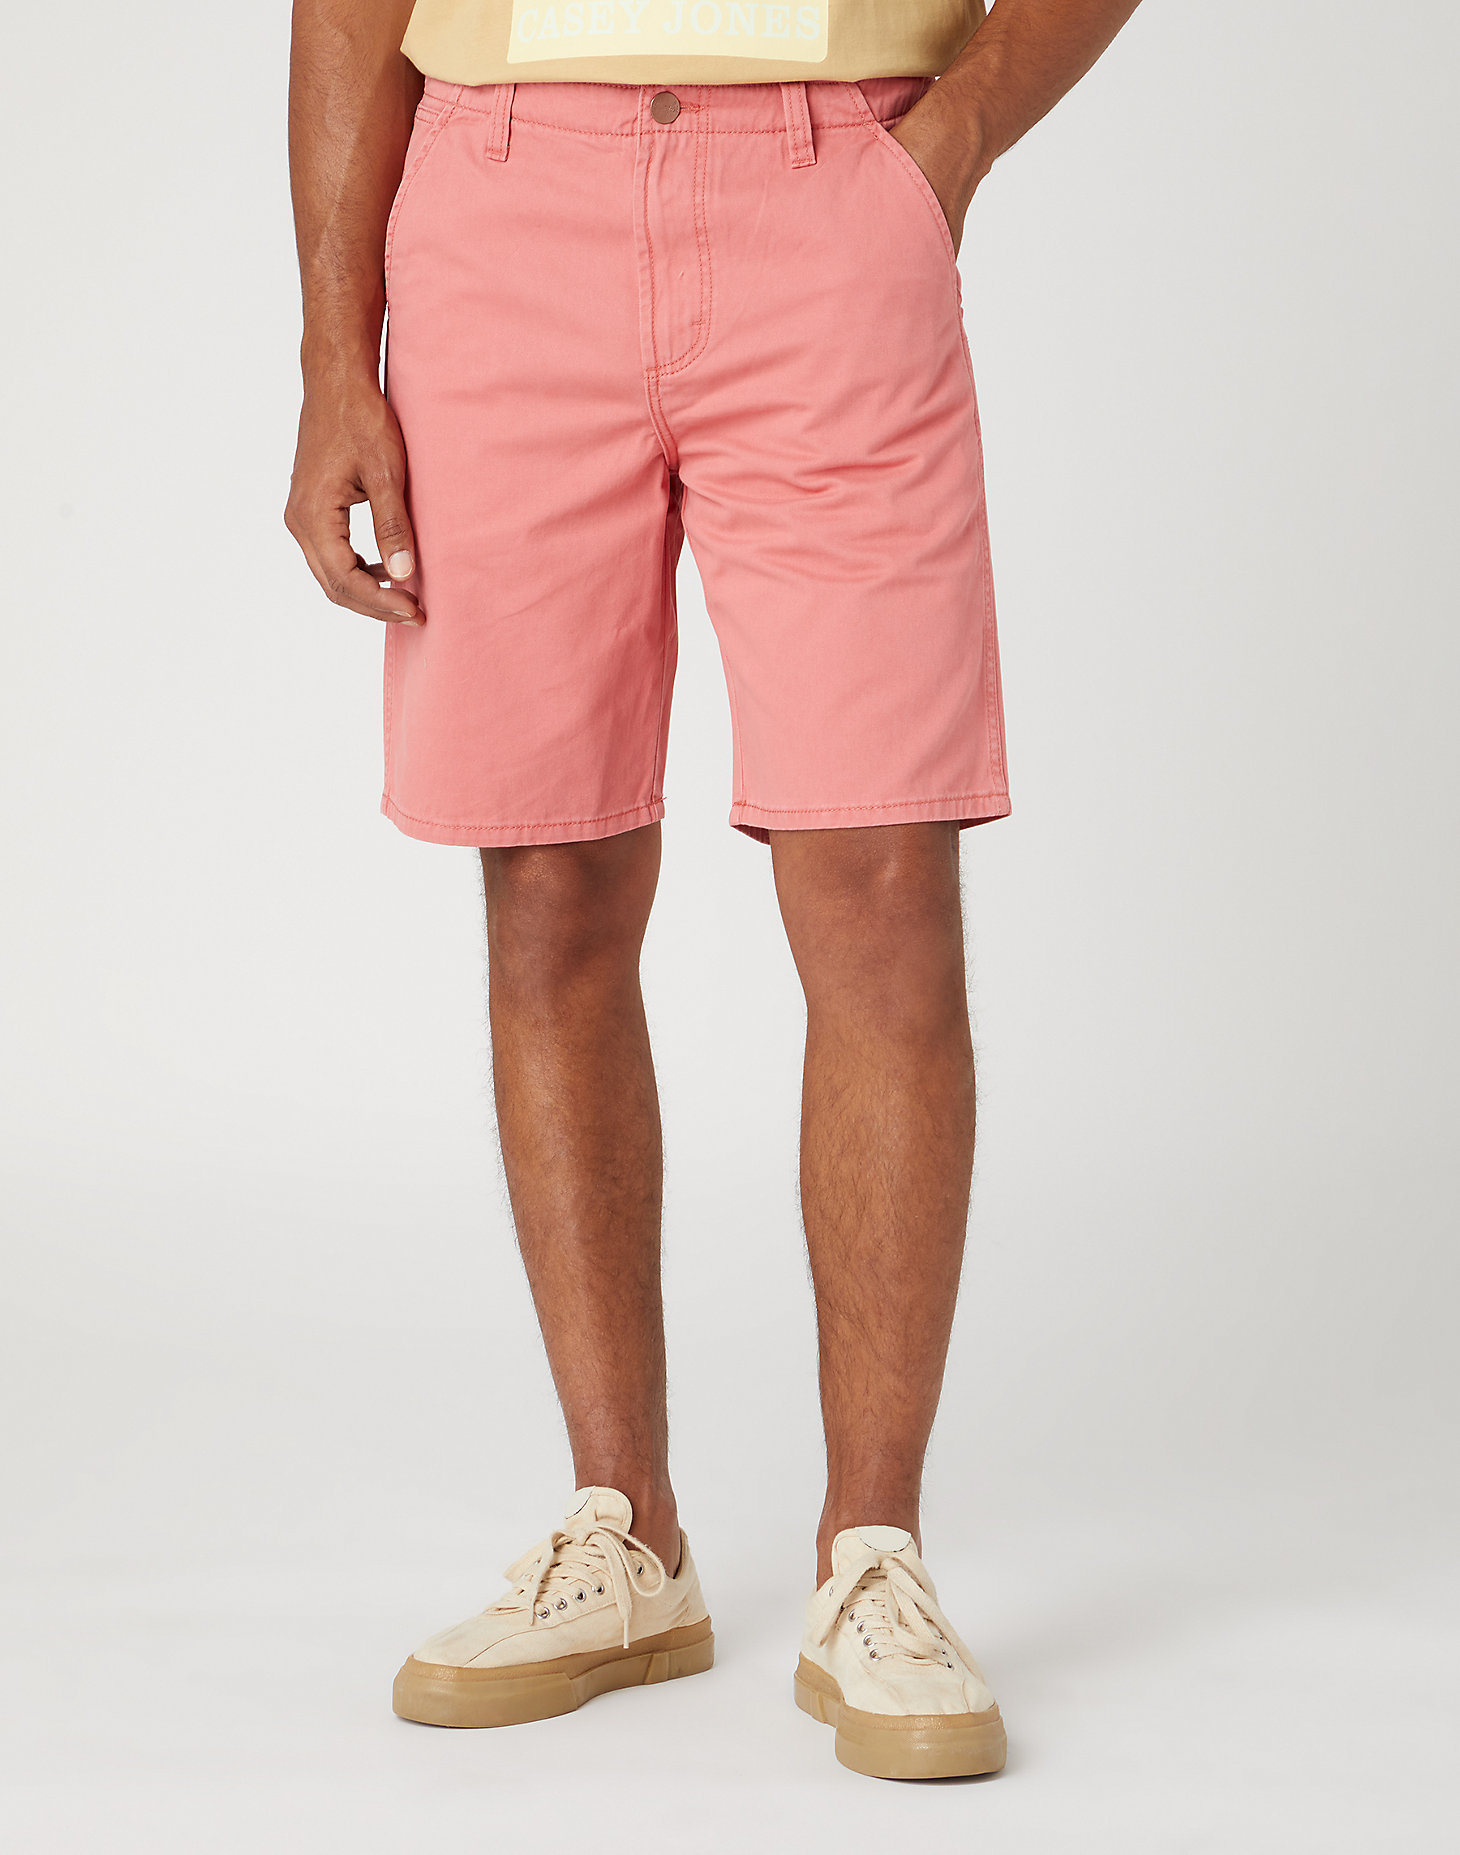 Casey Chino Shorts in Faded Rose main view